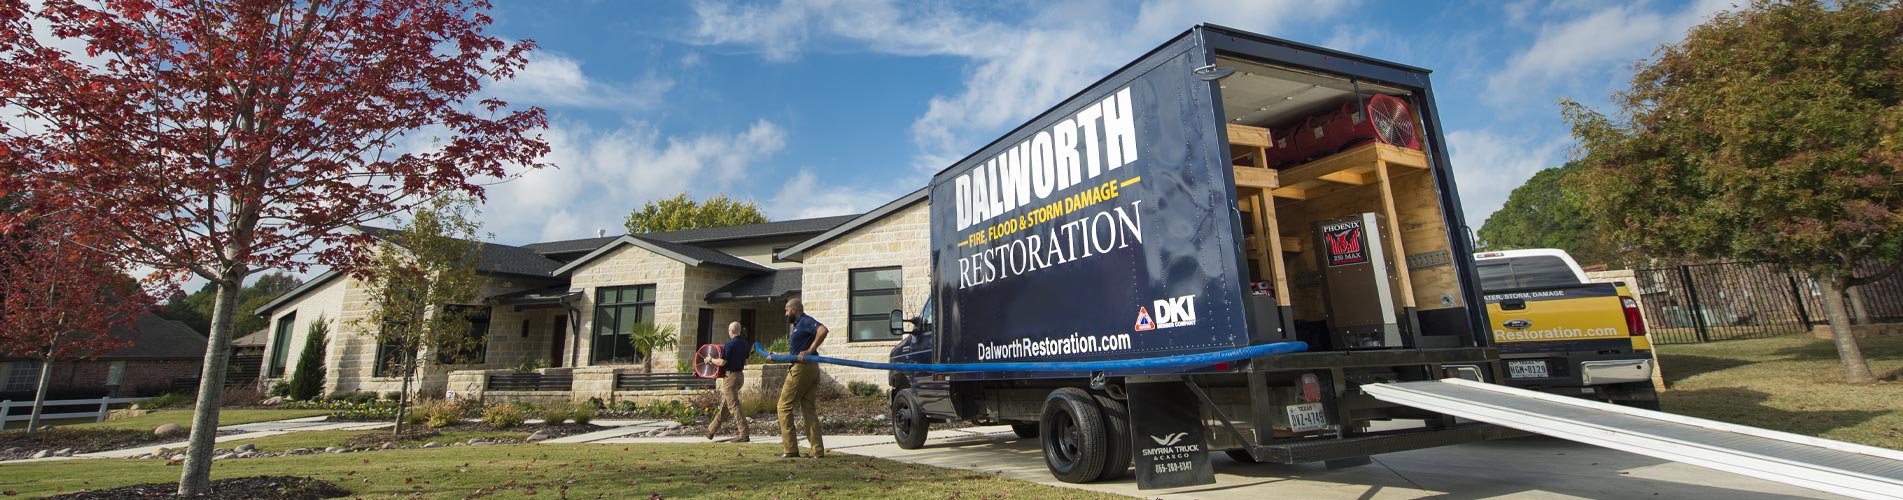 Dalworth Restoration's Truck and Crew members working on a restoration site